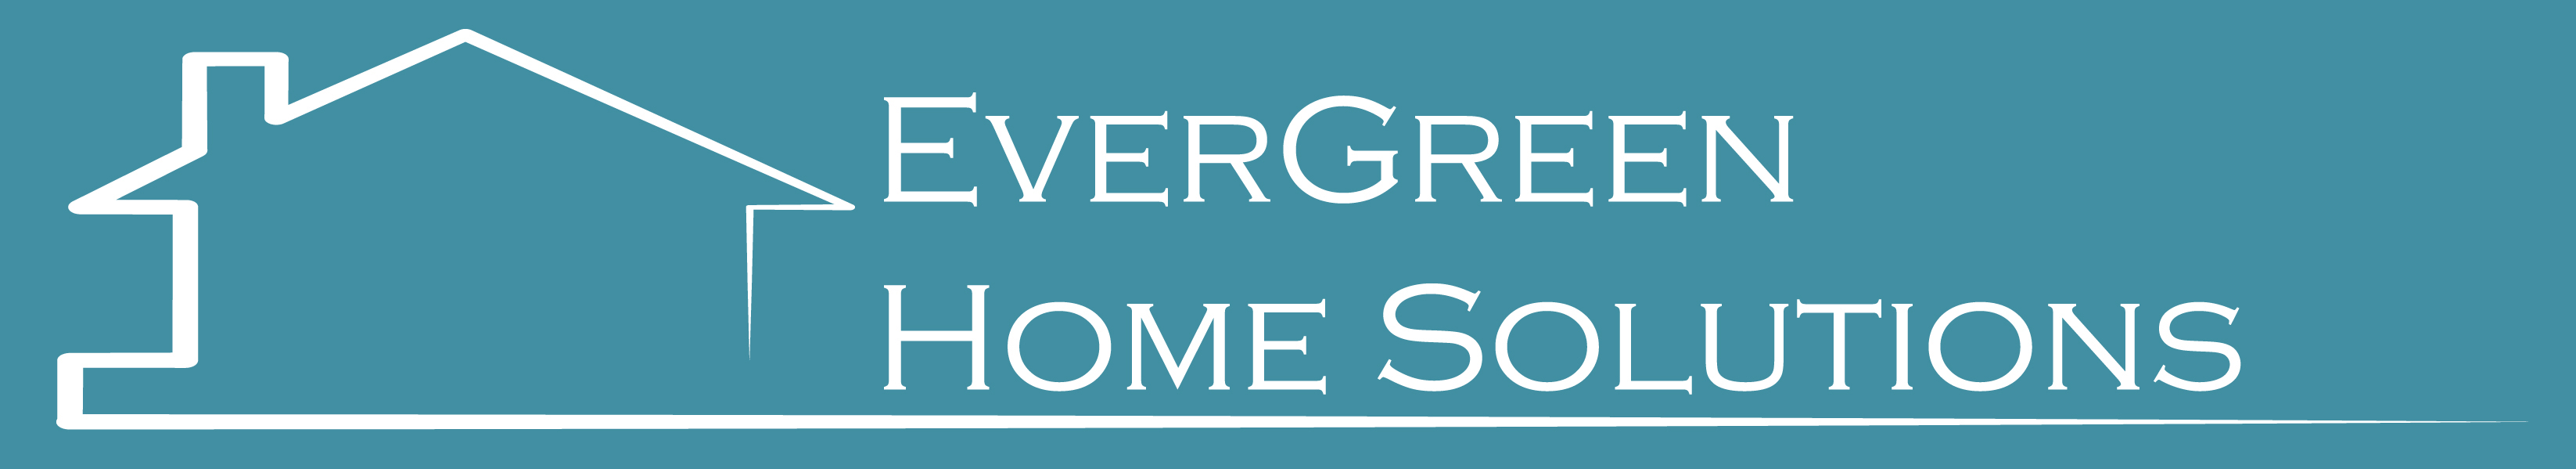 Evergreen home solutions